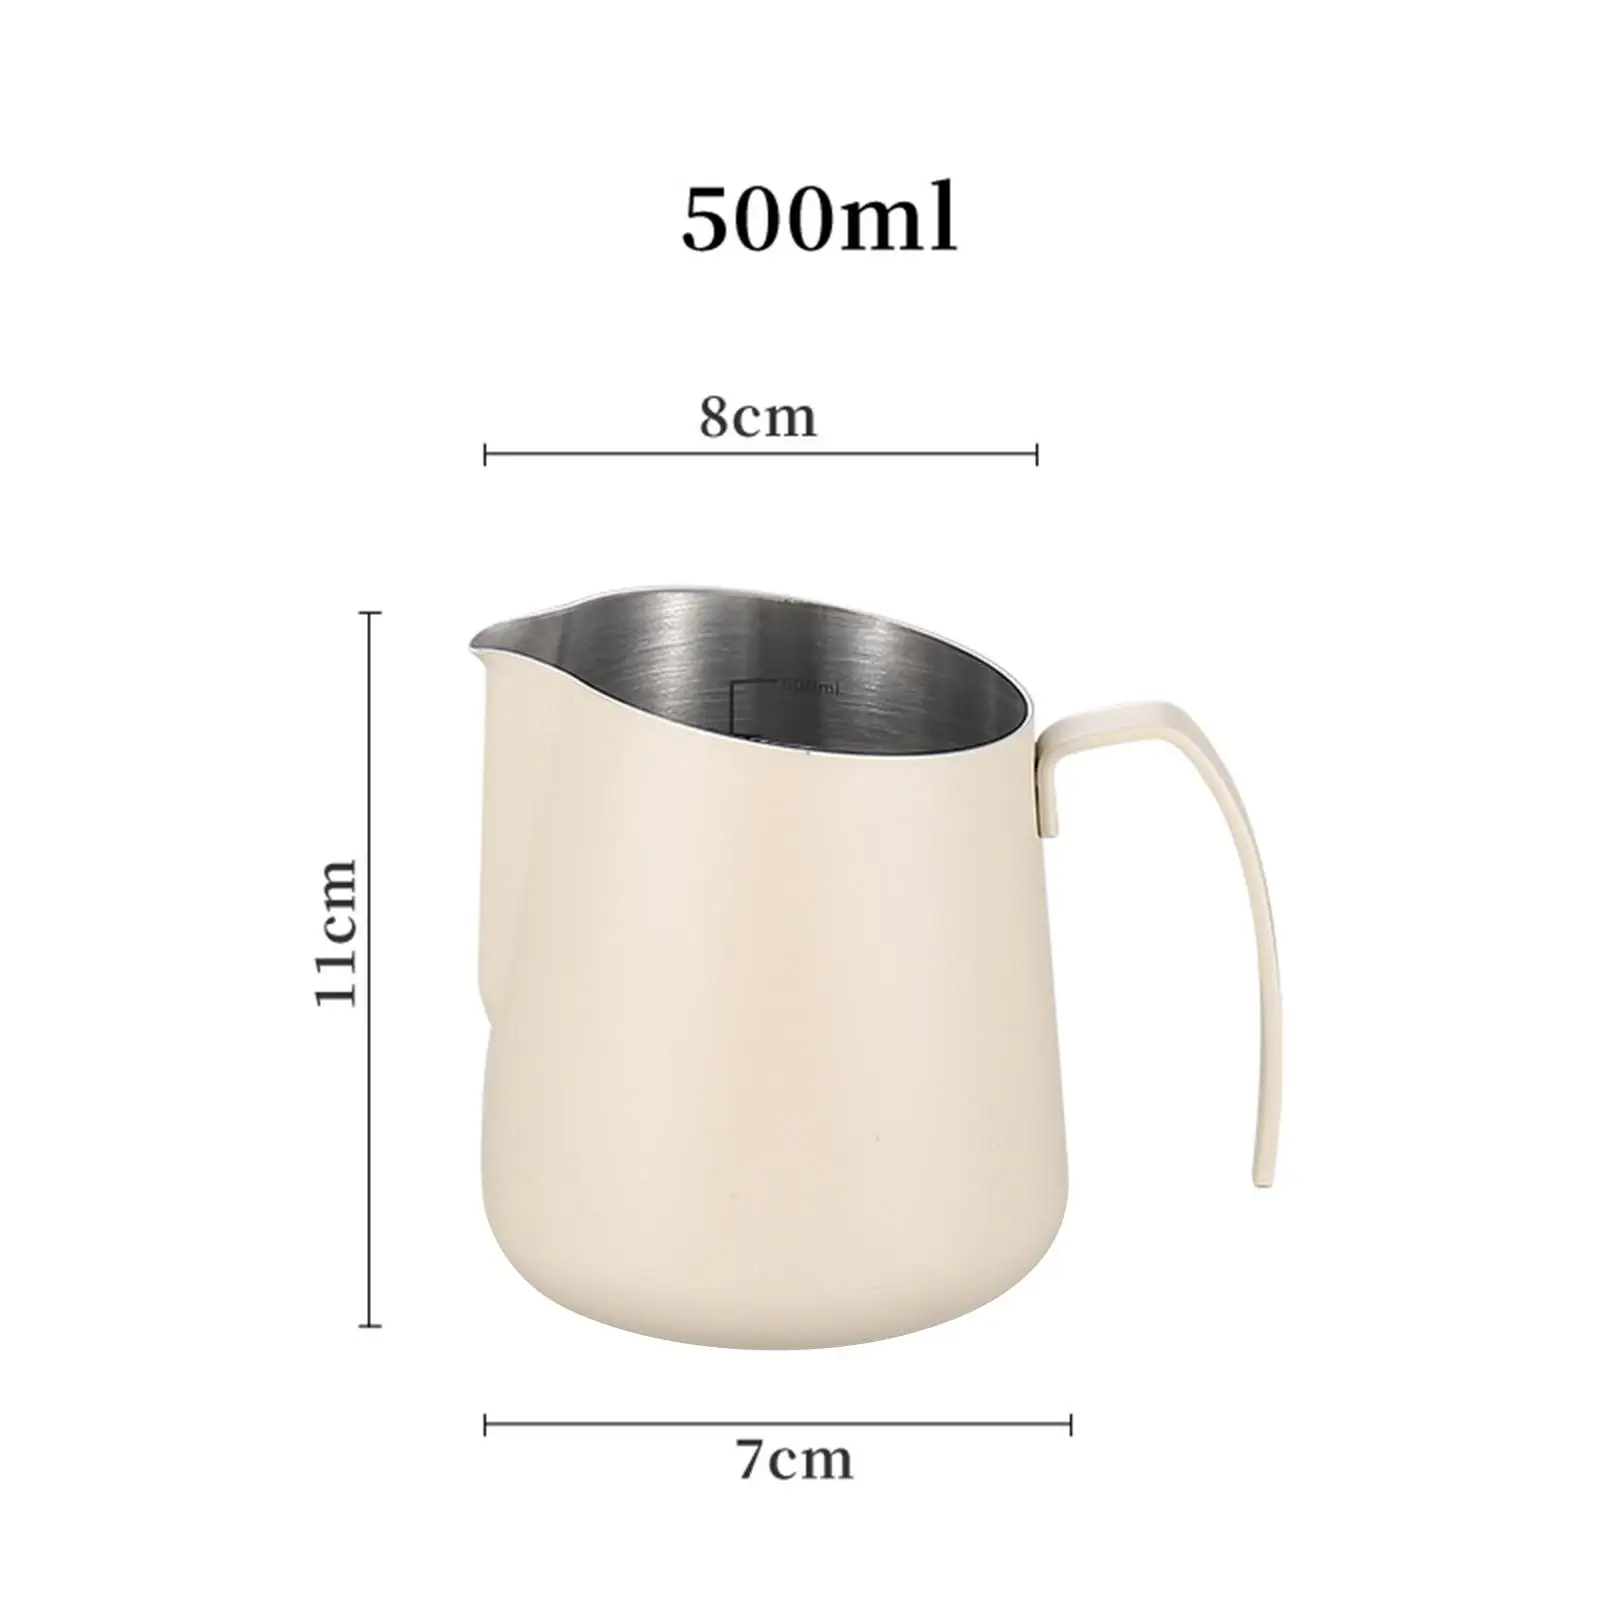 Coffee Milk Measuring Cup Portable 500ml with Scale Pouring Cup Coffee Milk Frothing Jug for Kitchen Bar Shop Cafe Latte Art